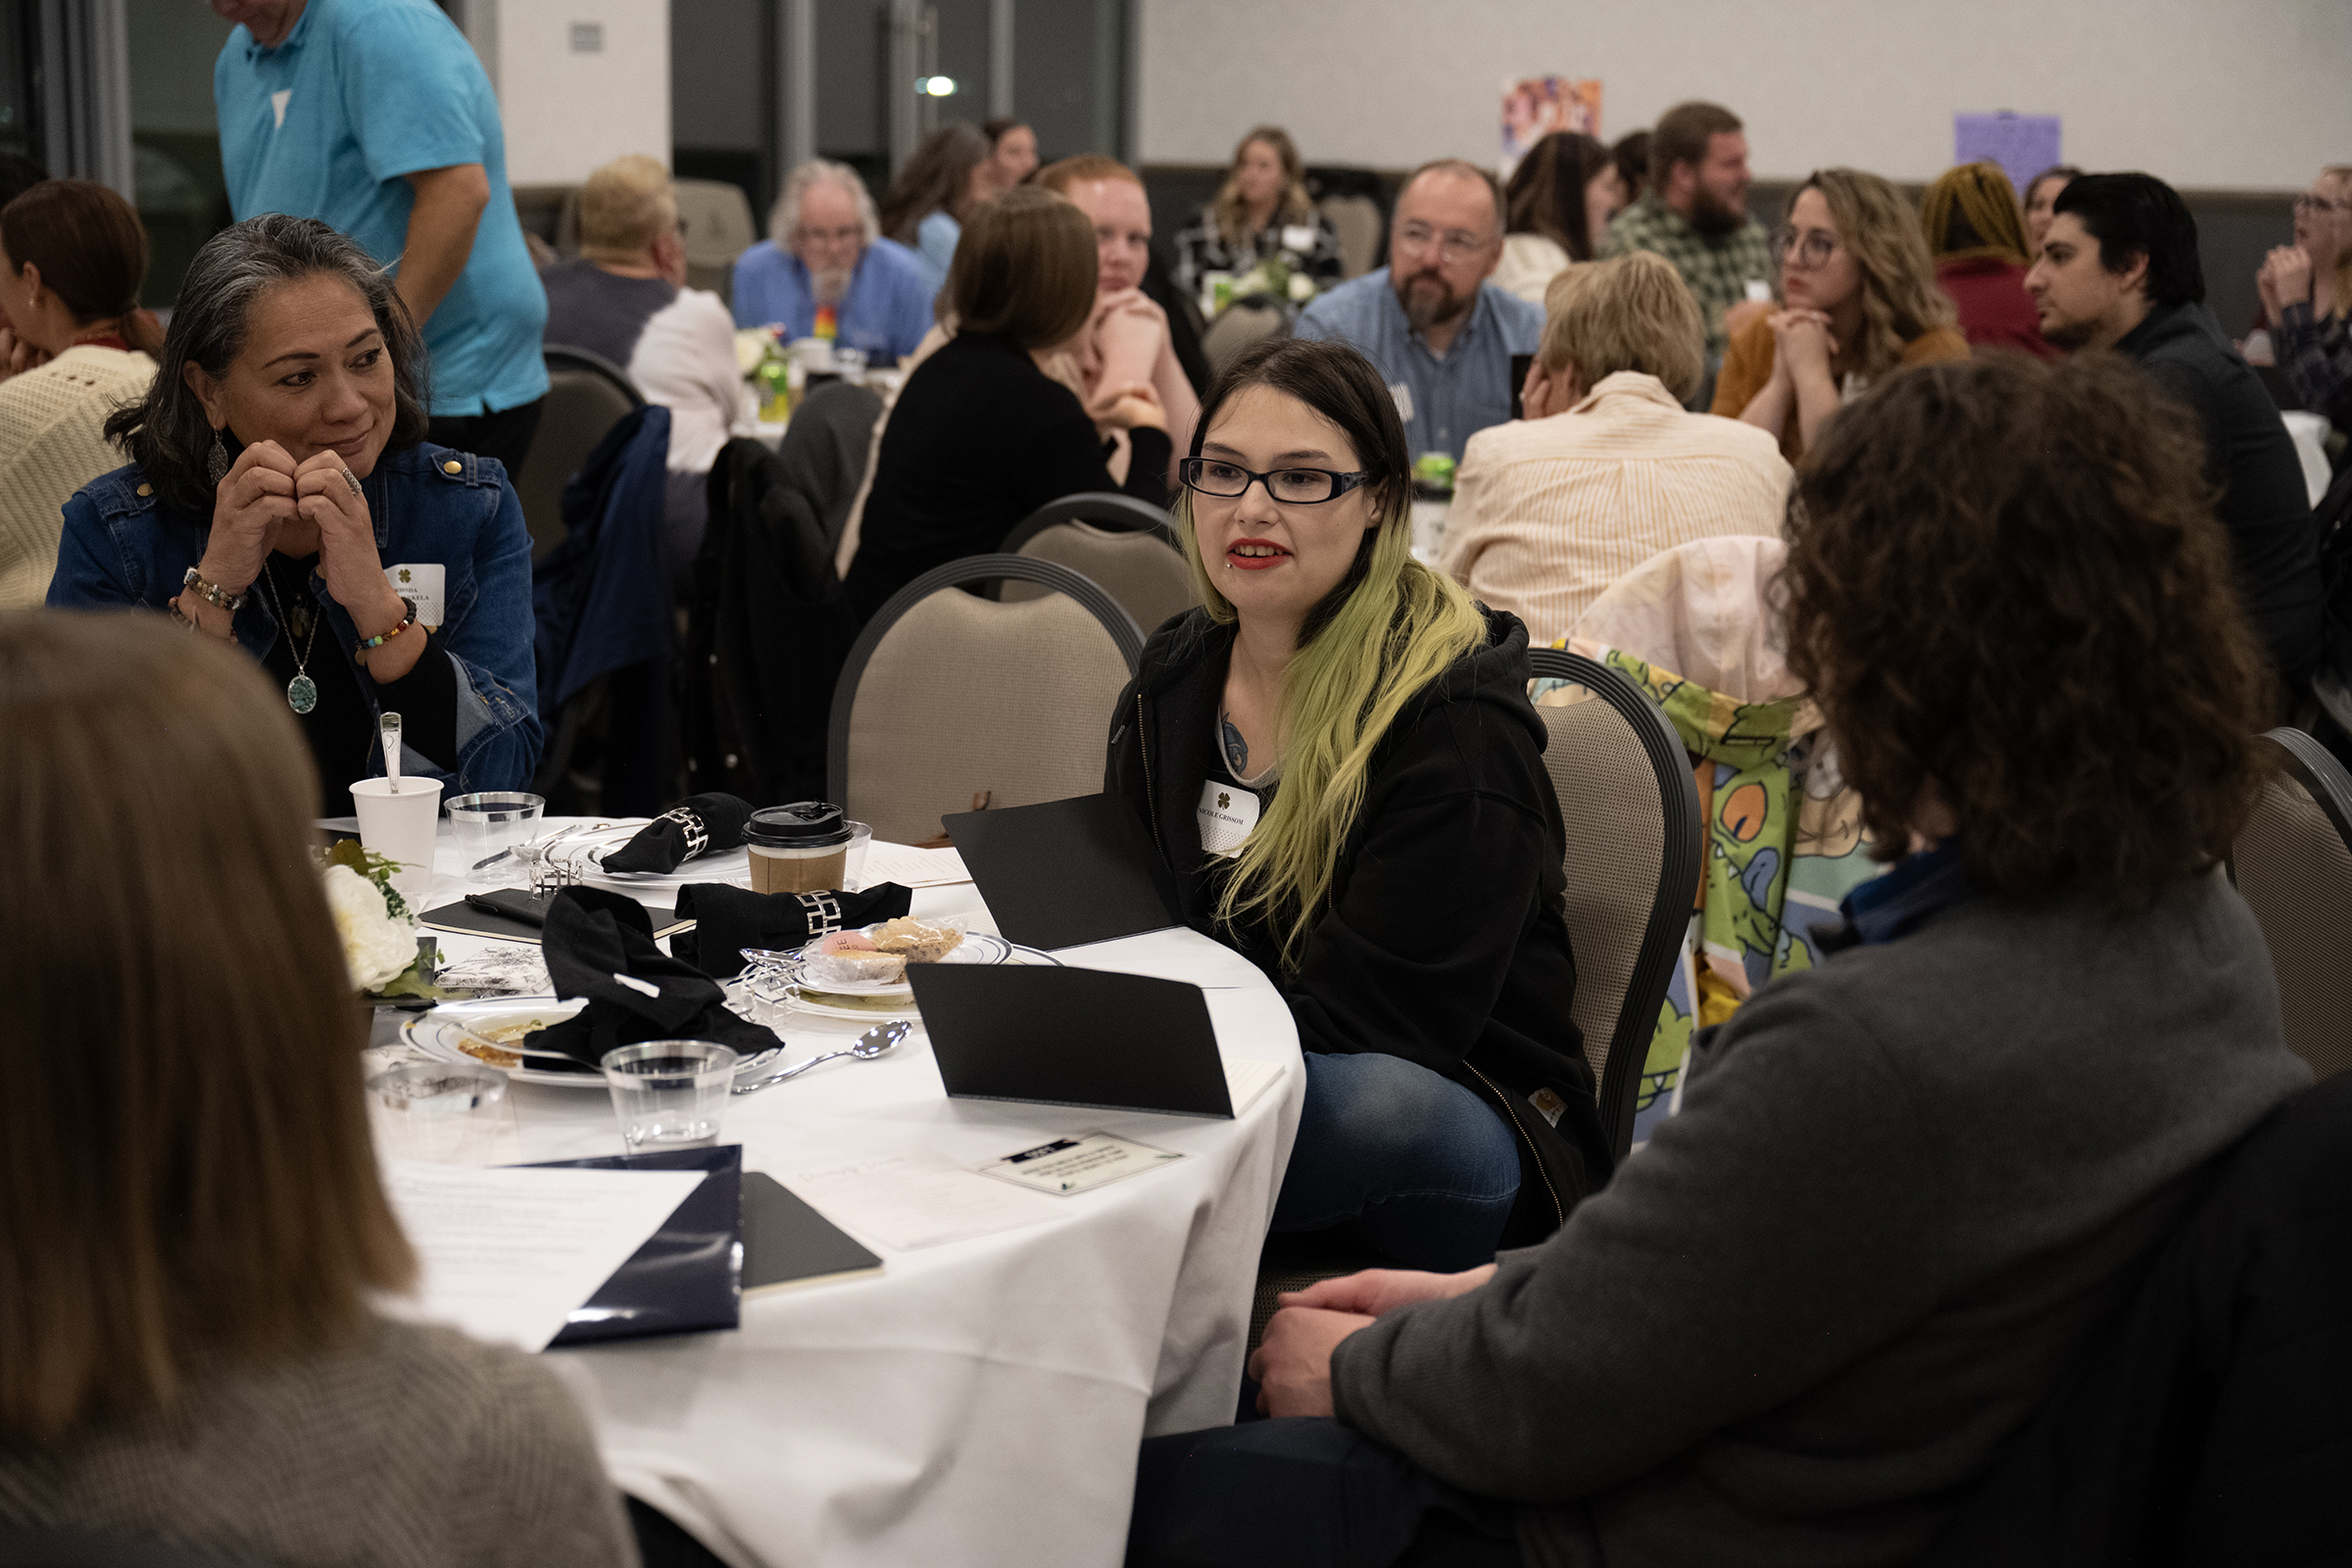 Attendees of Utah State Uintah Basin's Diversity Dinner sit at a round table discussing things prior to dinner.